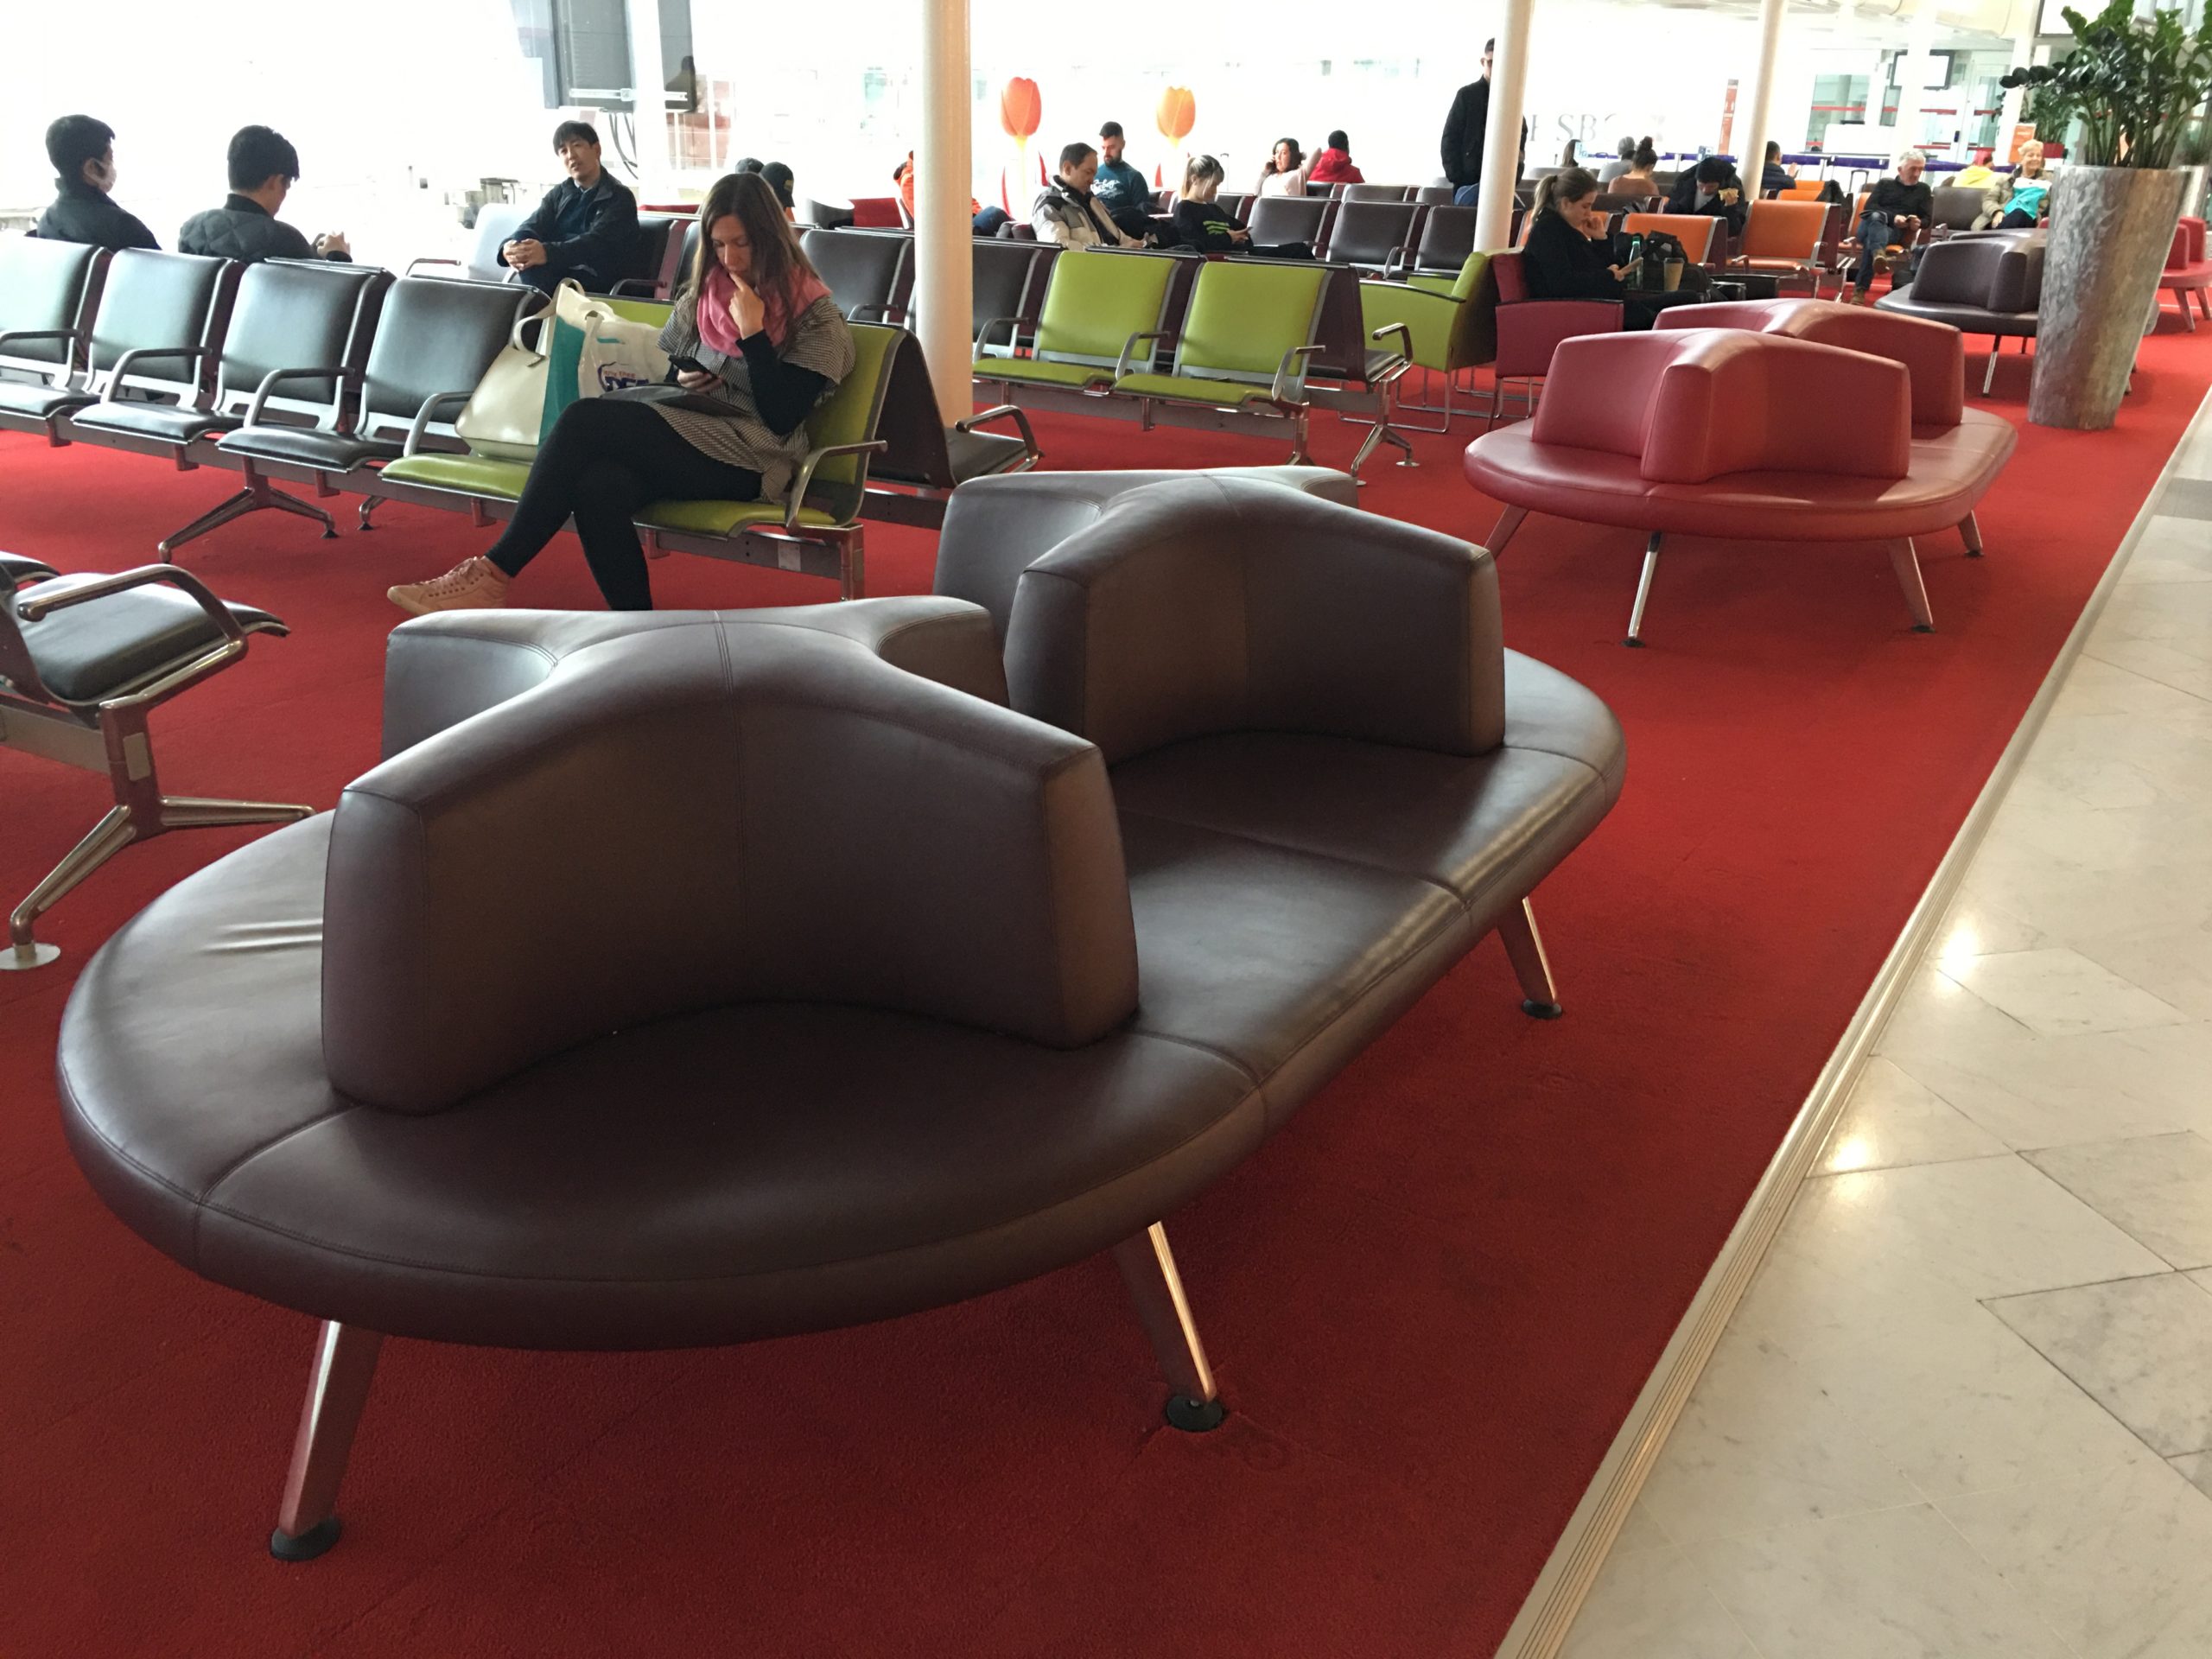 Everything To Know About Sleeping At Charles De Gaulle Airport - Skye  Travels